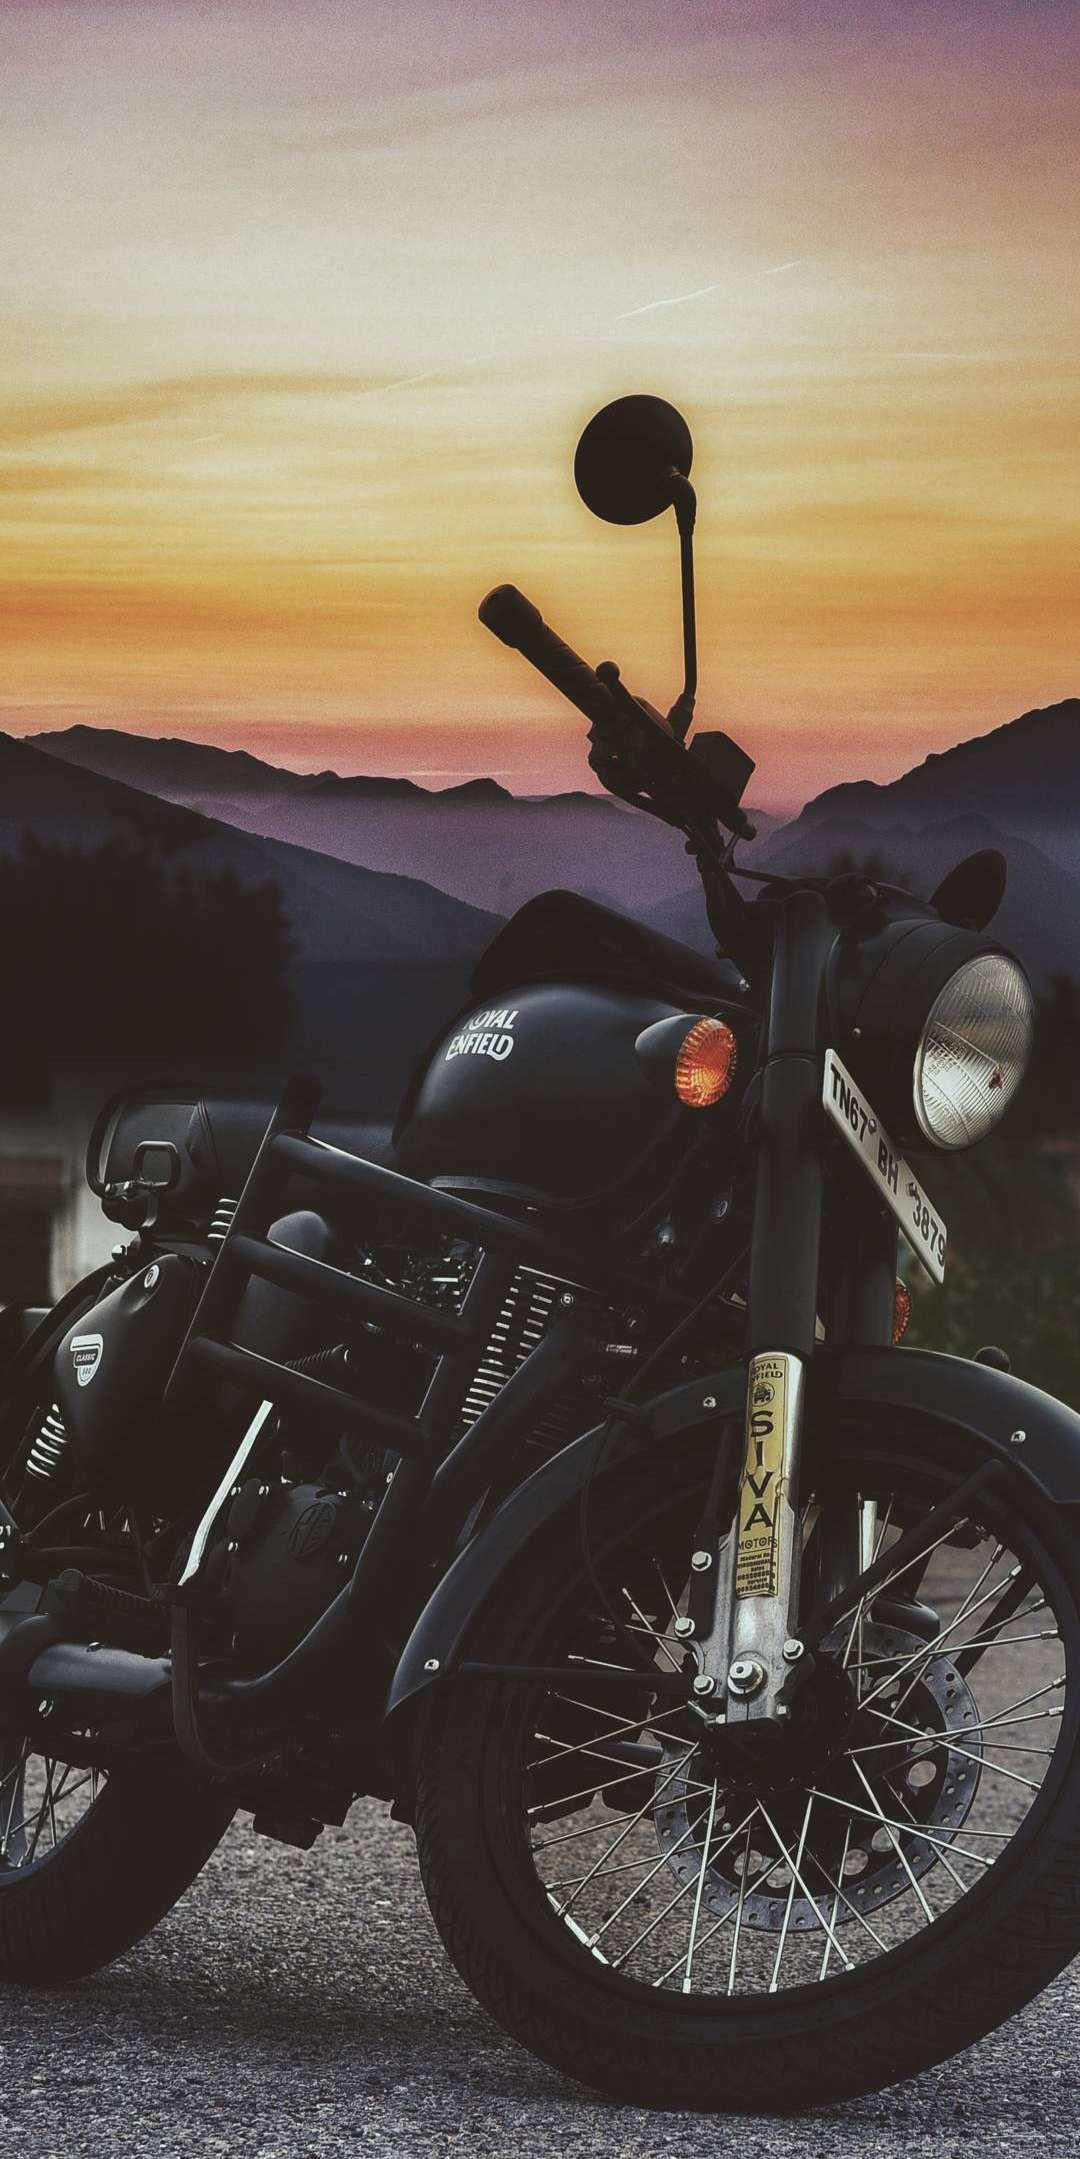 yasholo iPhone Wallpaper for iPhone iPhone 8 Plus, iPhone. Royal enfield wallpaper, Royal enfield classic 350cc, Royal enfield modified